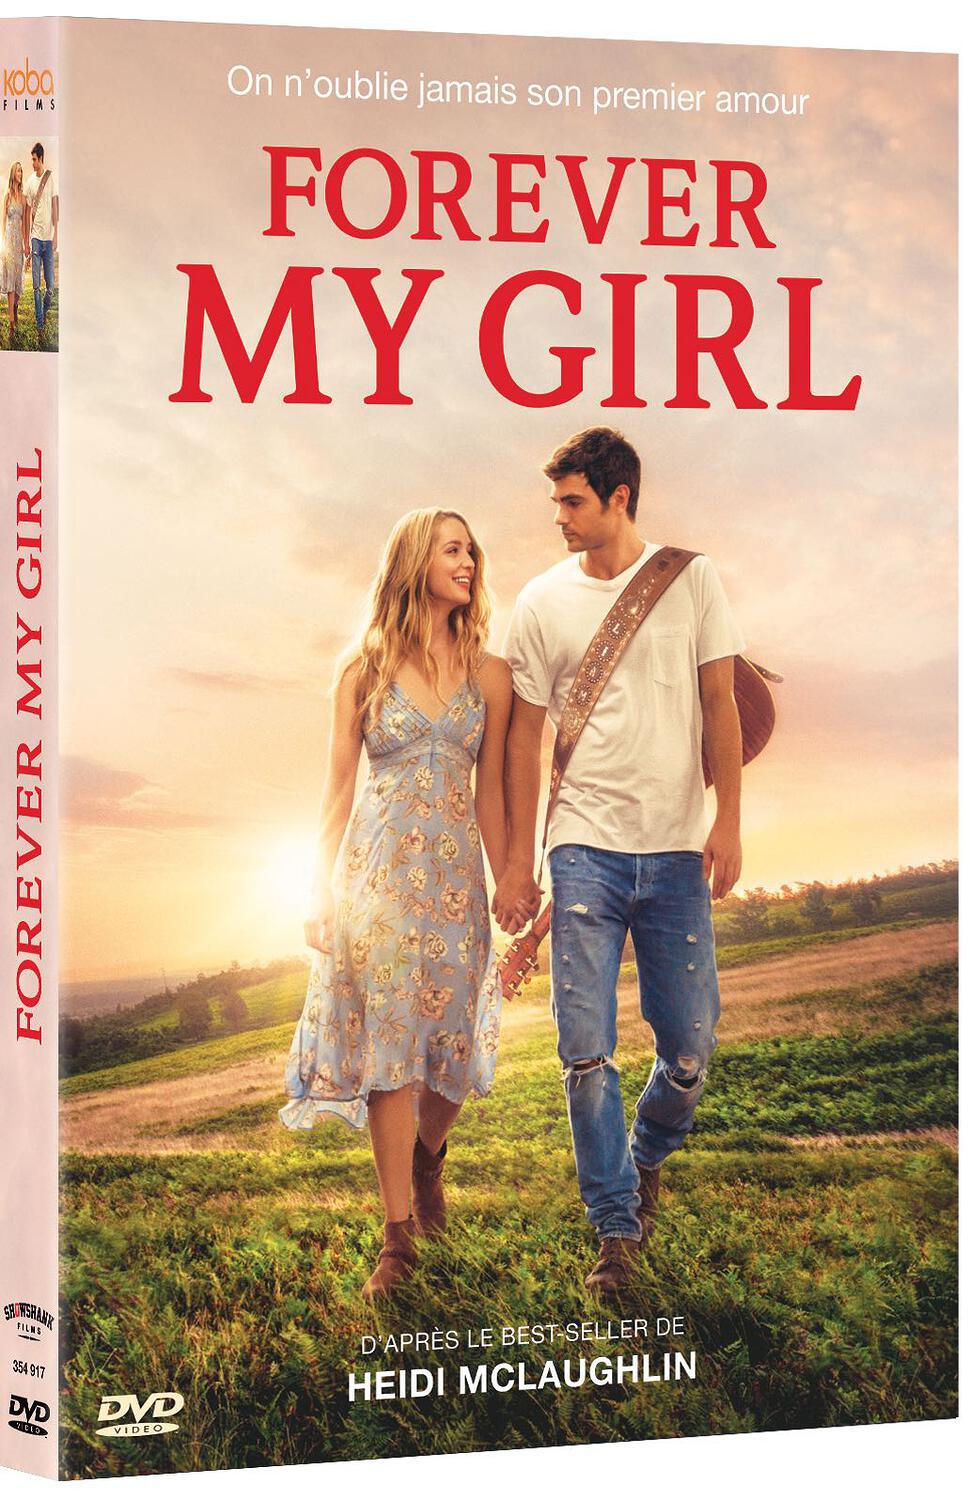 Couverture de : Forever my girl